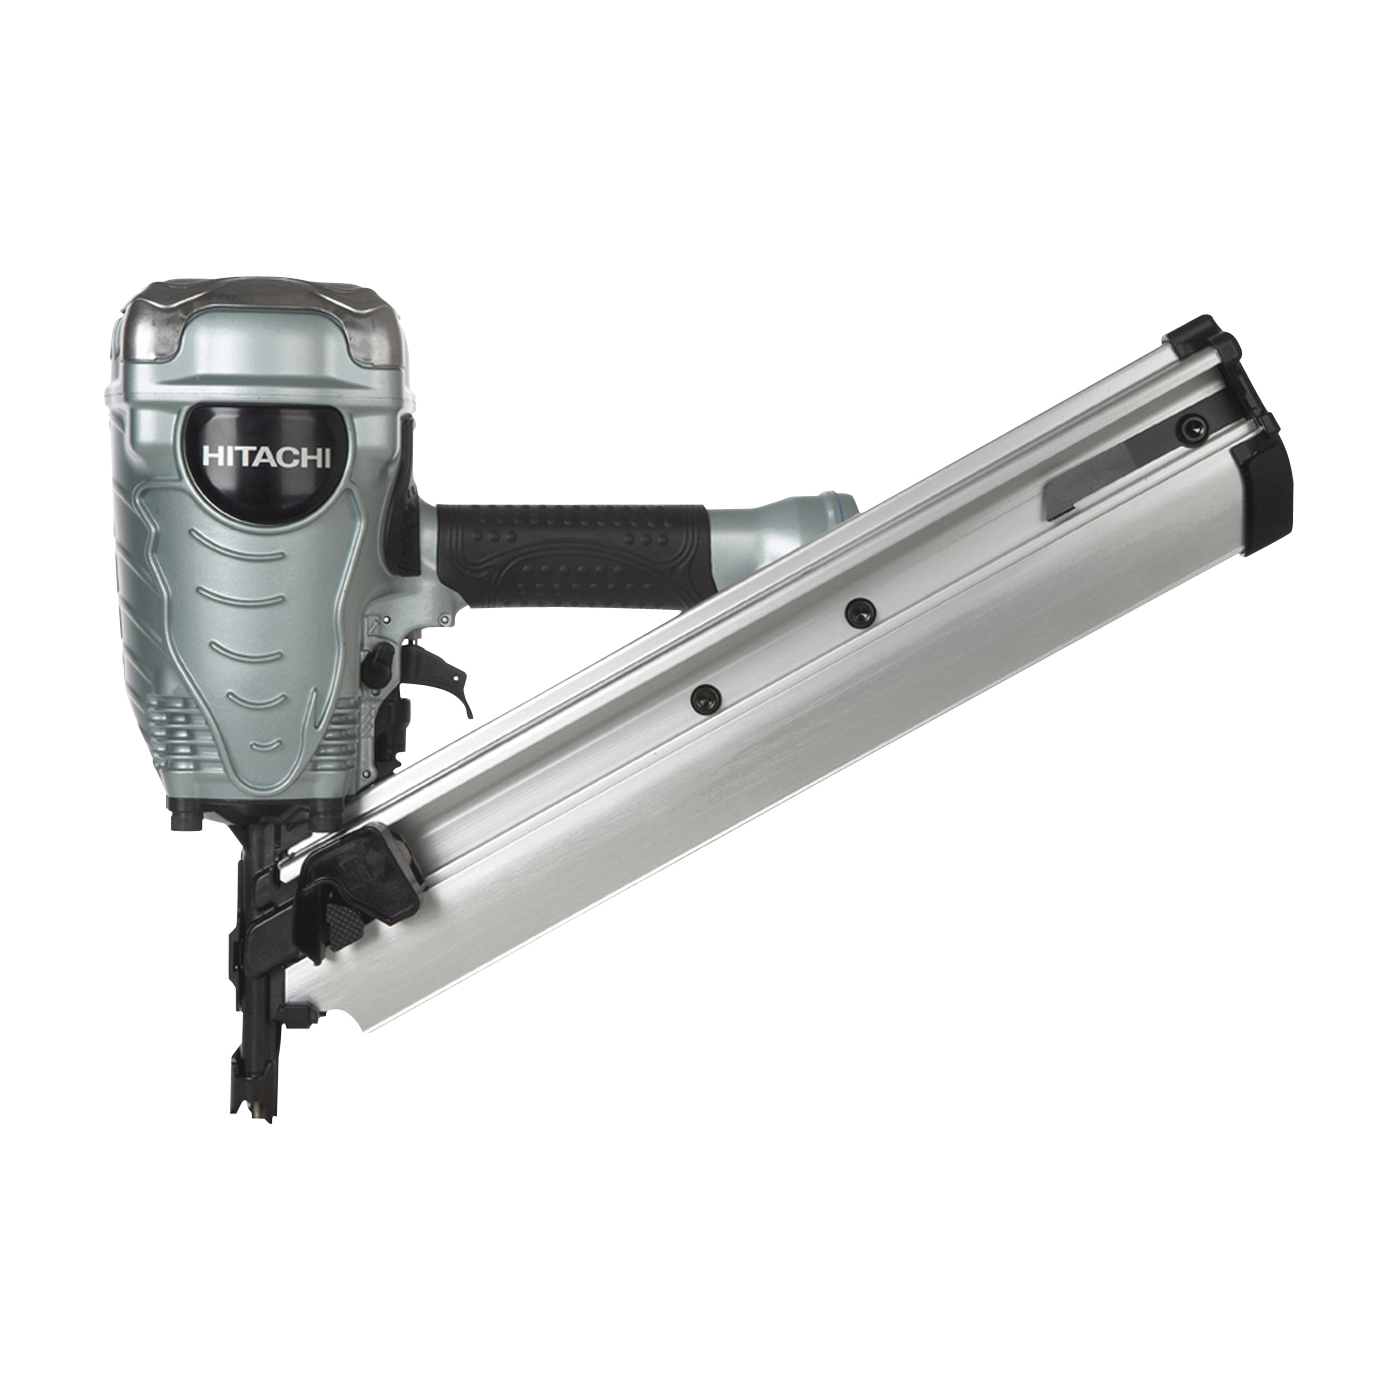 NR90AD(S1) Framing Nailer, 50 to 74 Magazine, 35 deg Collation, Paper Tape Collation, 0.09 cu-ft/Cycle Air